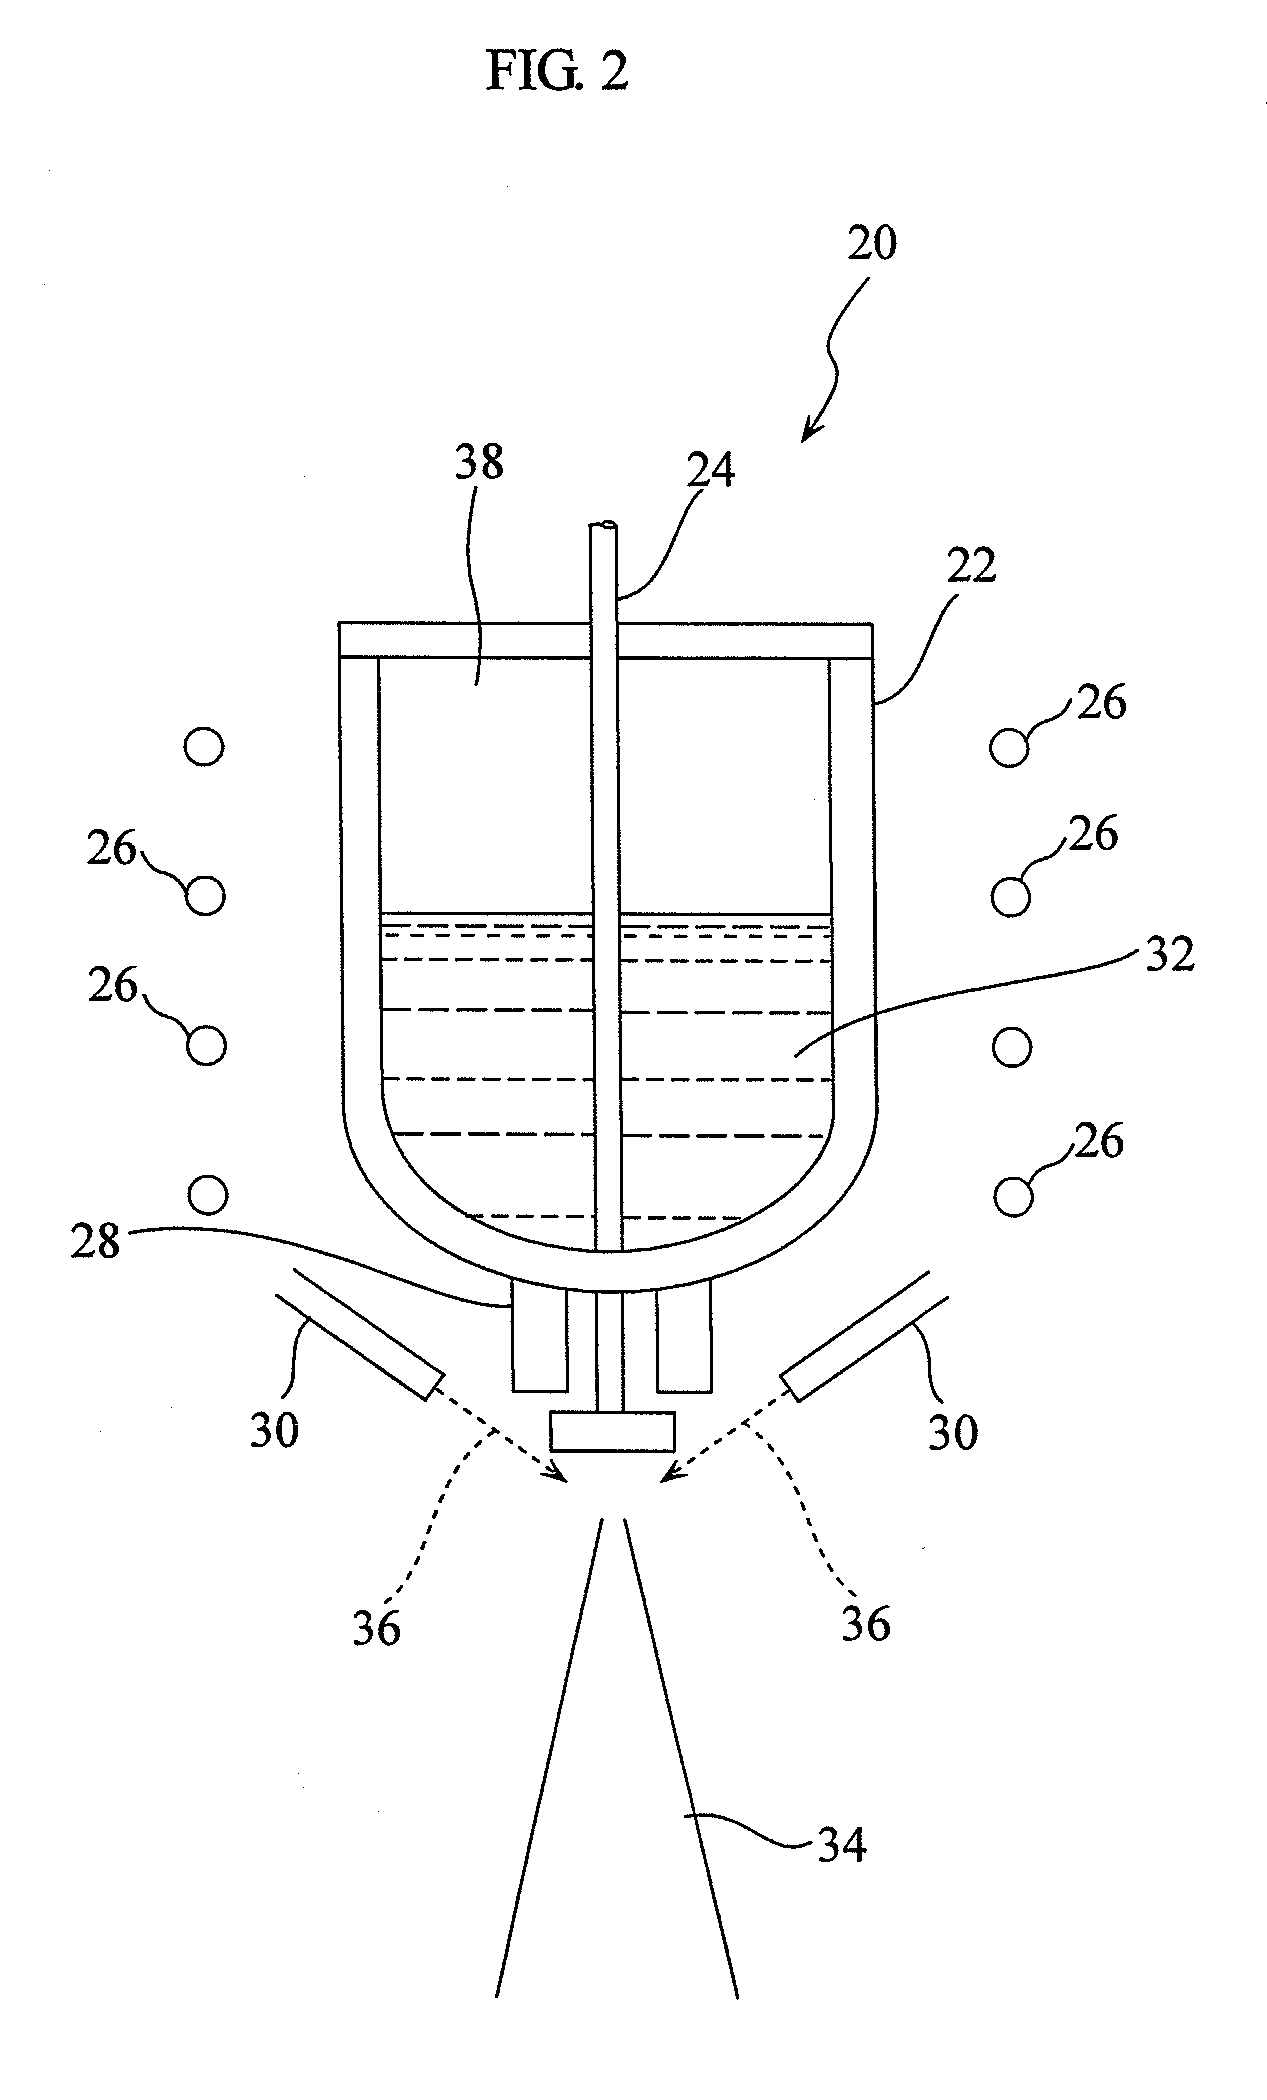 Metal particles, process for manufacturing the same, and process for manufacturing vehicle components therefrom